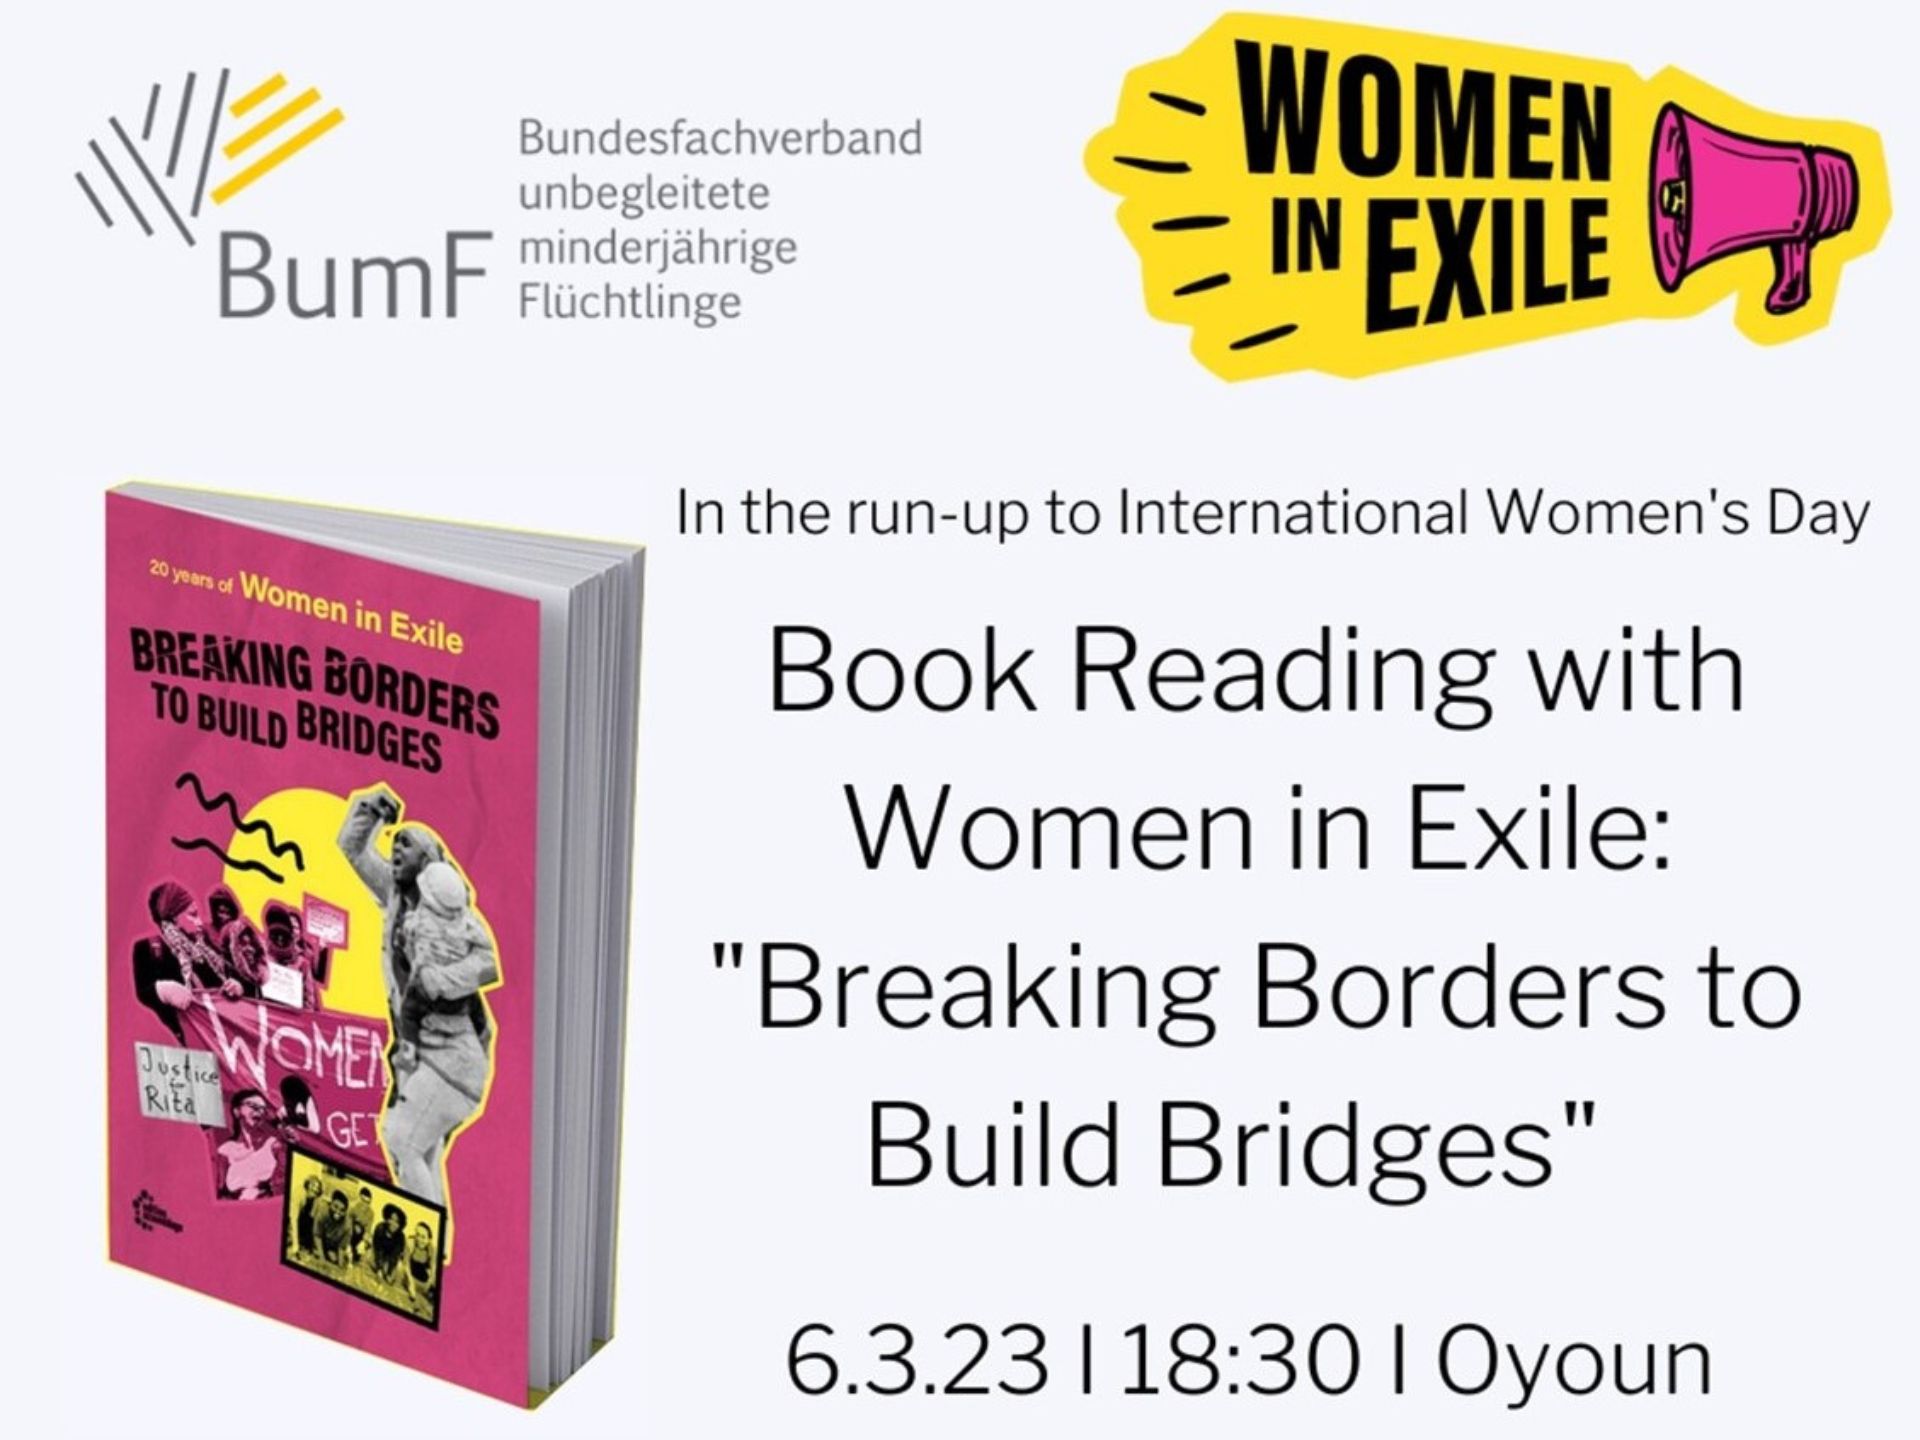 Book reading with Women in Exile – “Breaking Borders to Build Bridges”